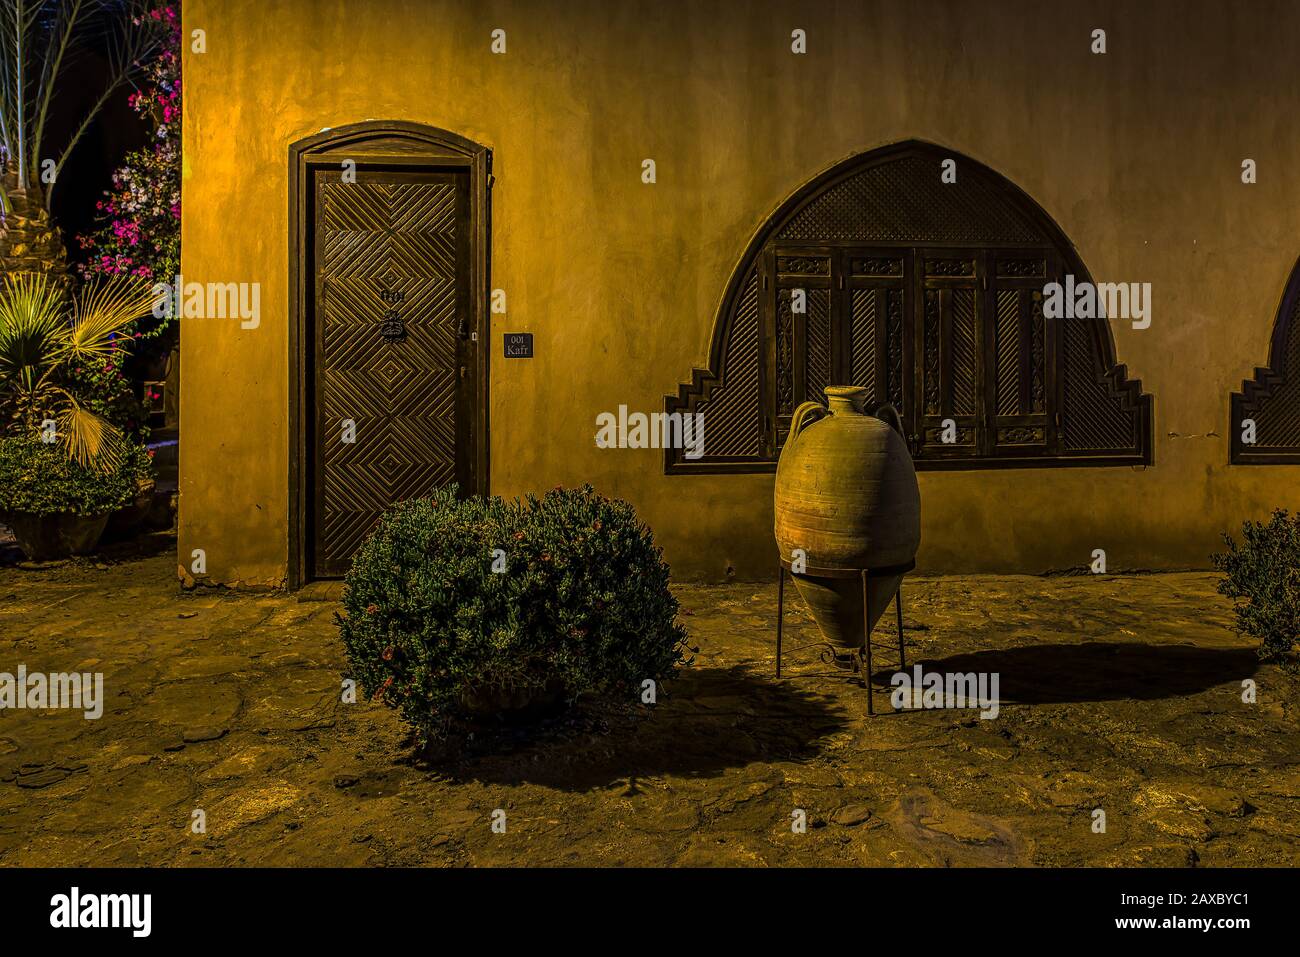 the exterior facade of an Egyptian villa with wooden door and shutters at night, el Gouna, Egypt, January 16, 2020 Stock Photo